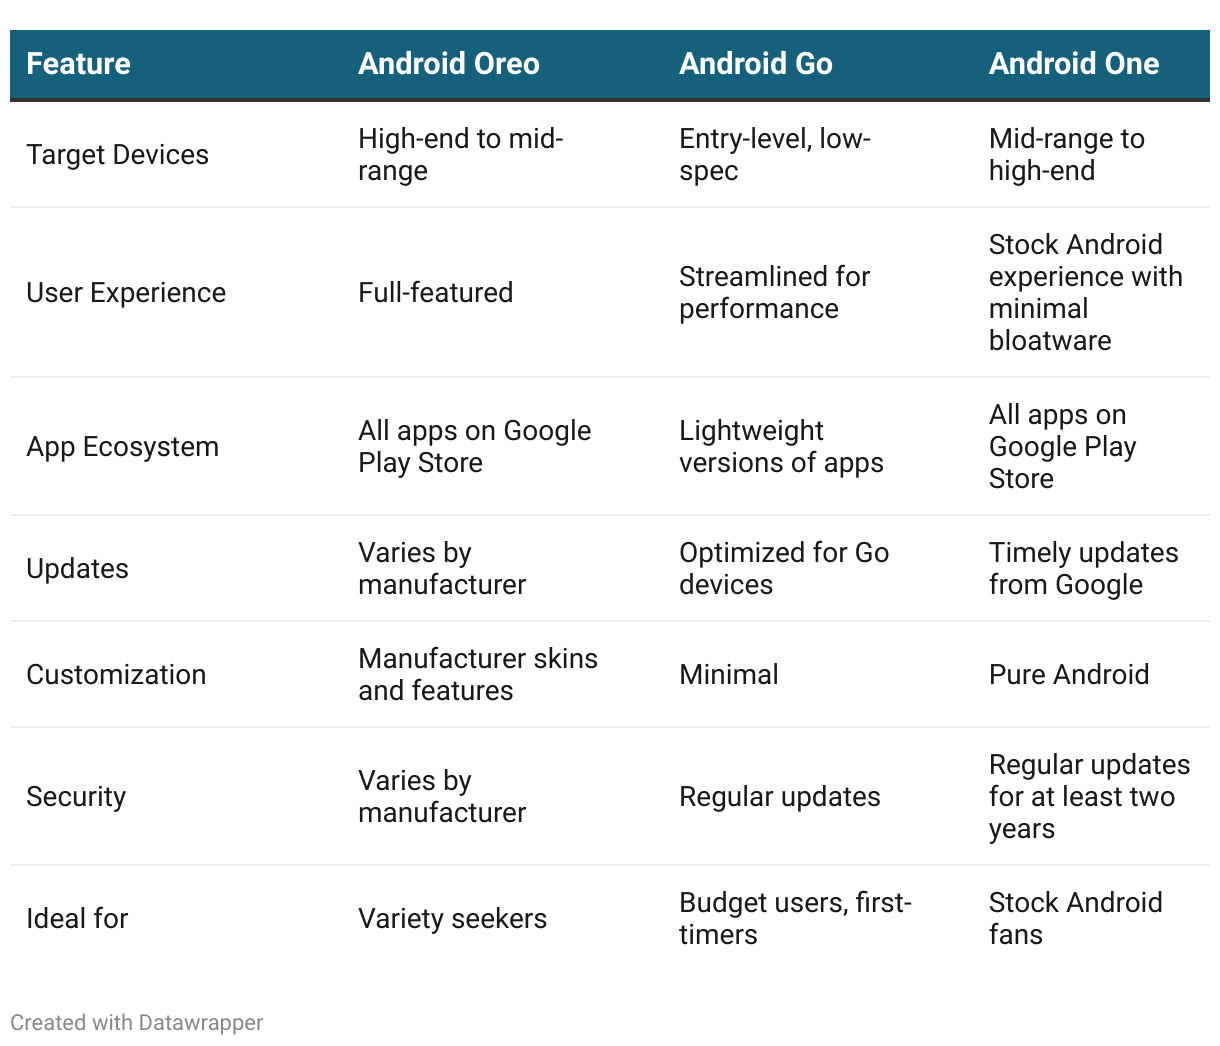 Comparison table of Android versions. It contrasts Android Oreo, Android Go, and Android One across seven categories: target devices, ranging from high-end to entry-level; user experience, from full-featured to streamlined; app ecosystem, from all apps to lightweight versions; updates, from manufacturer-dependent to direct from Google; customization, from extensive to minimal; security, from variable to regular updates; and ideal users, from variety seekers to stock Android fans.